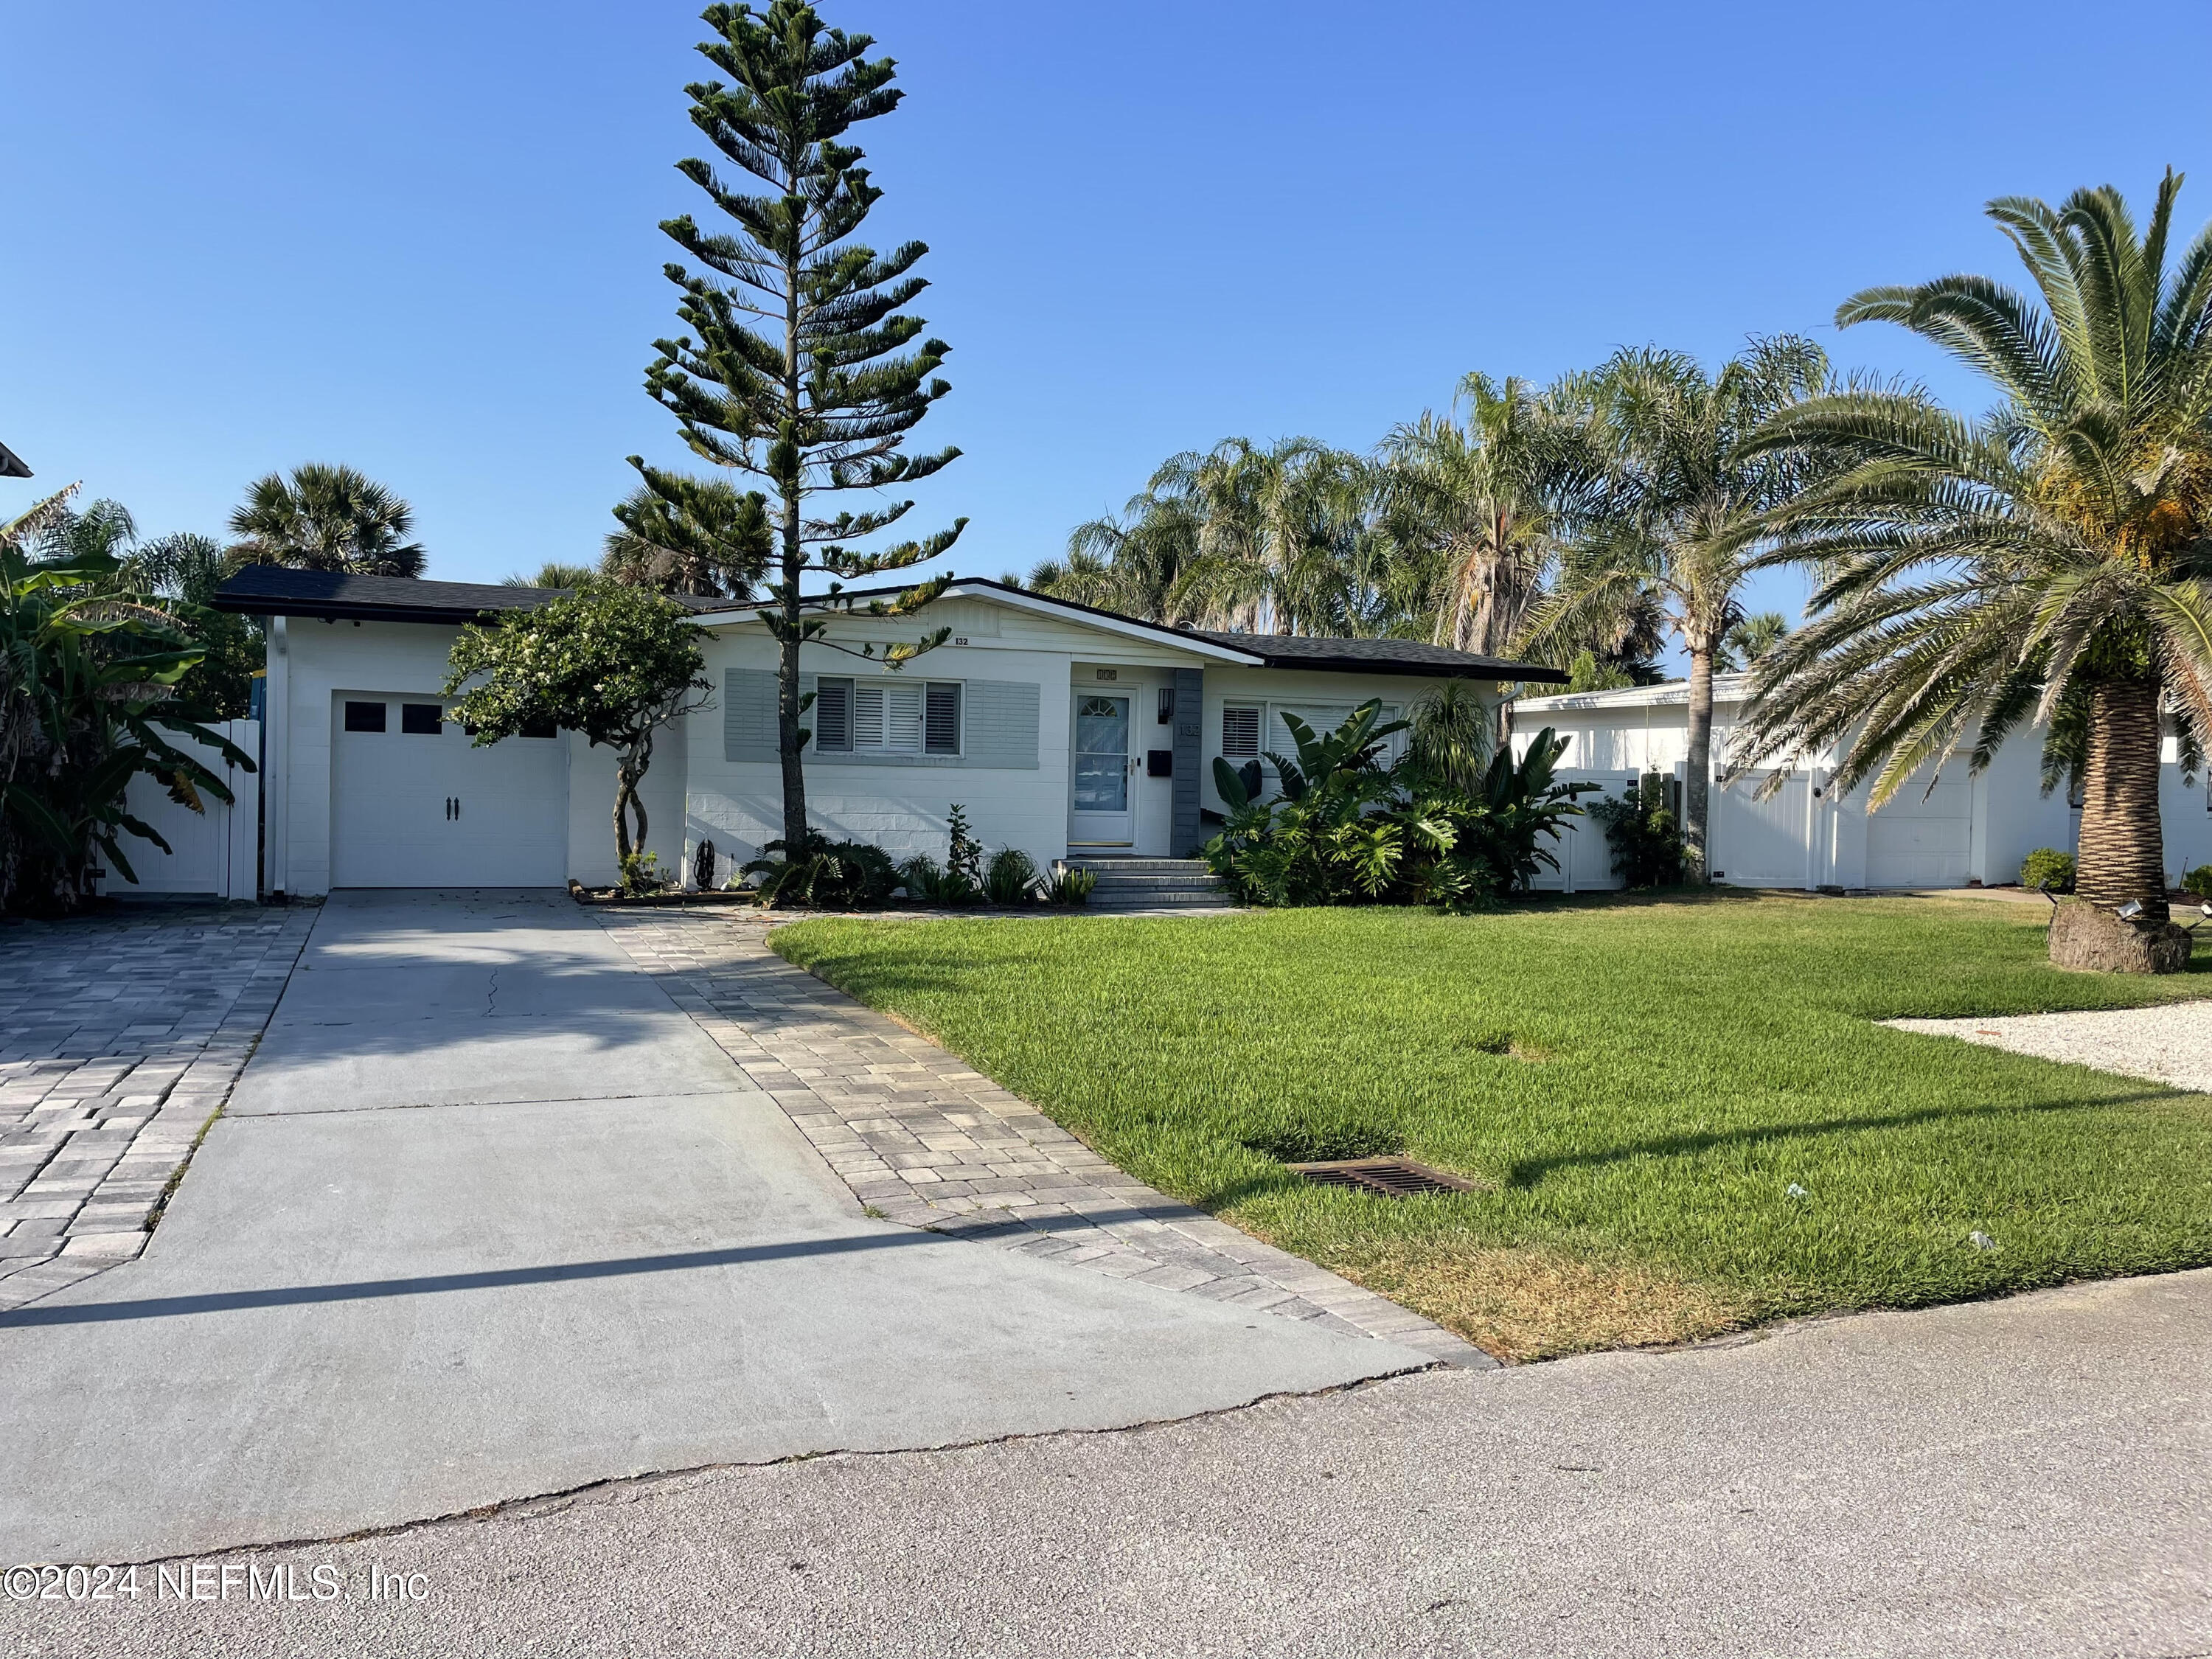 Jacksonville Beach, FL home for sale located at 132 30th Avenue S, Jacksonville Beach, FL 32250